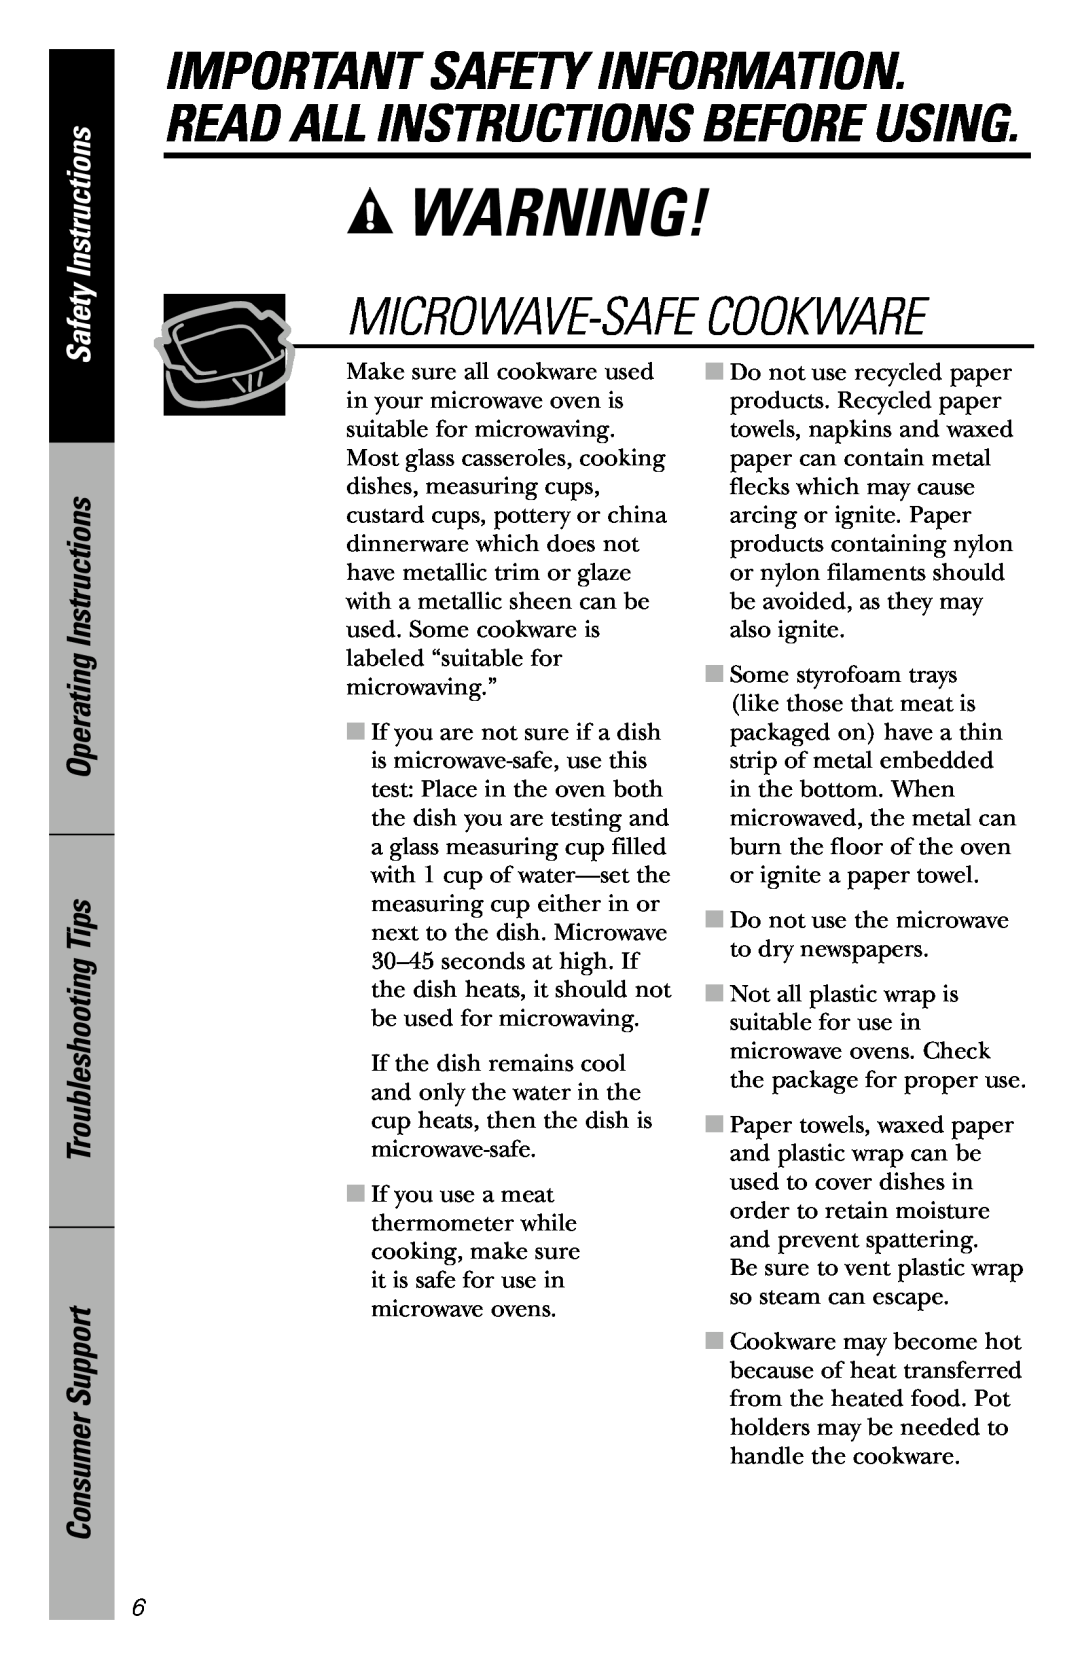 GE JVM3660WD Microwave-Safecookware, Safety Instructions, Operating Instructions Troubleshooting Tips, Consumer Support 